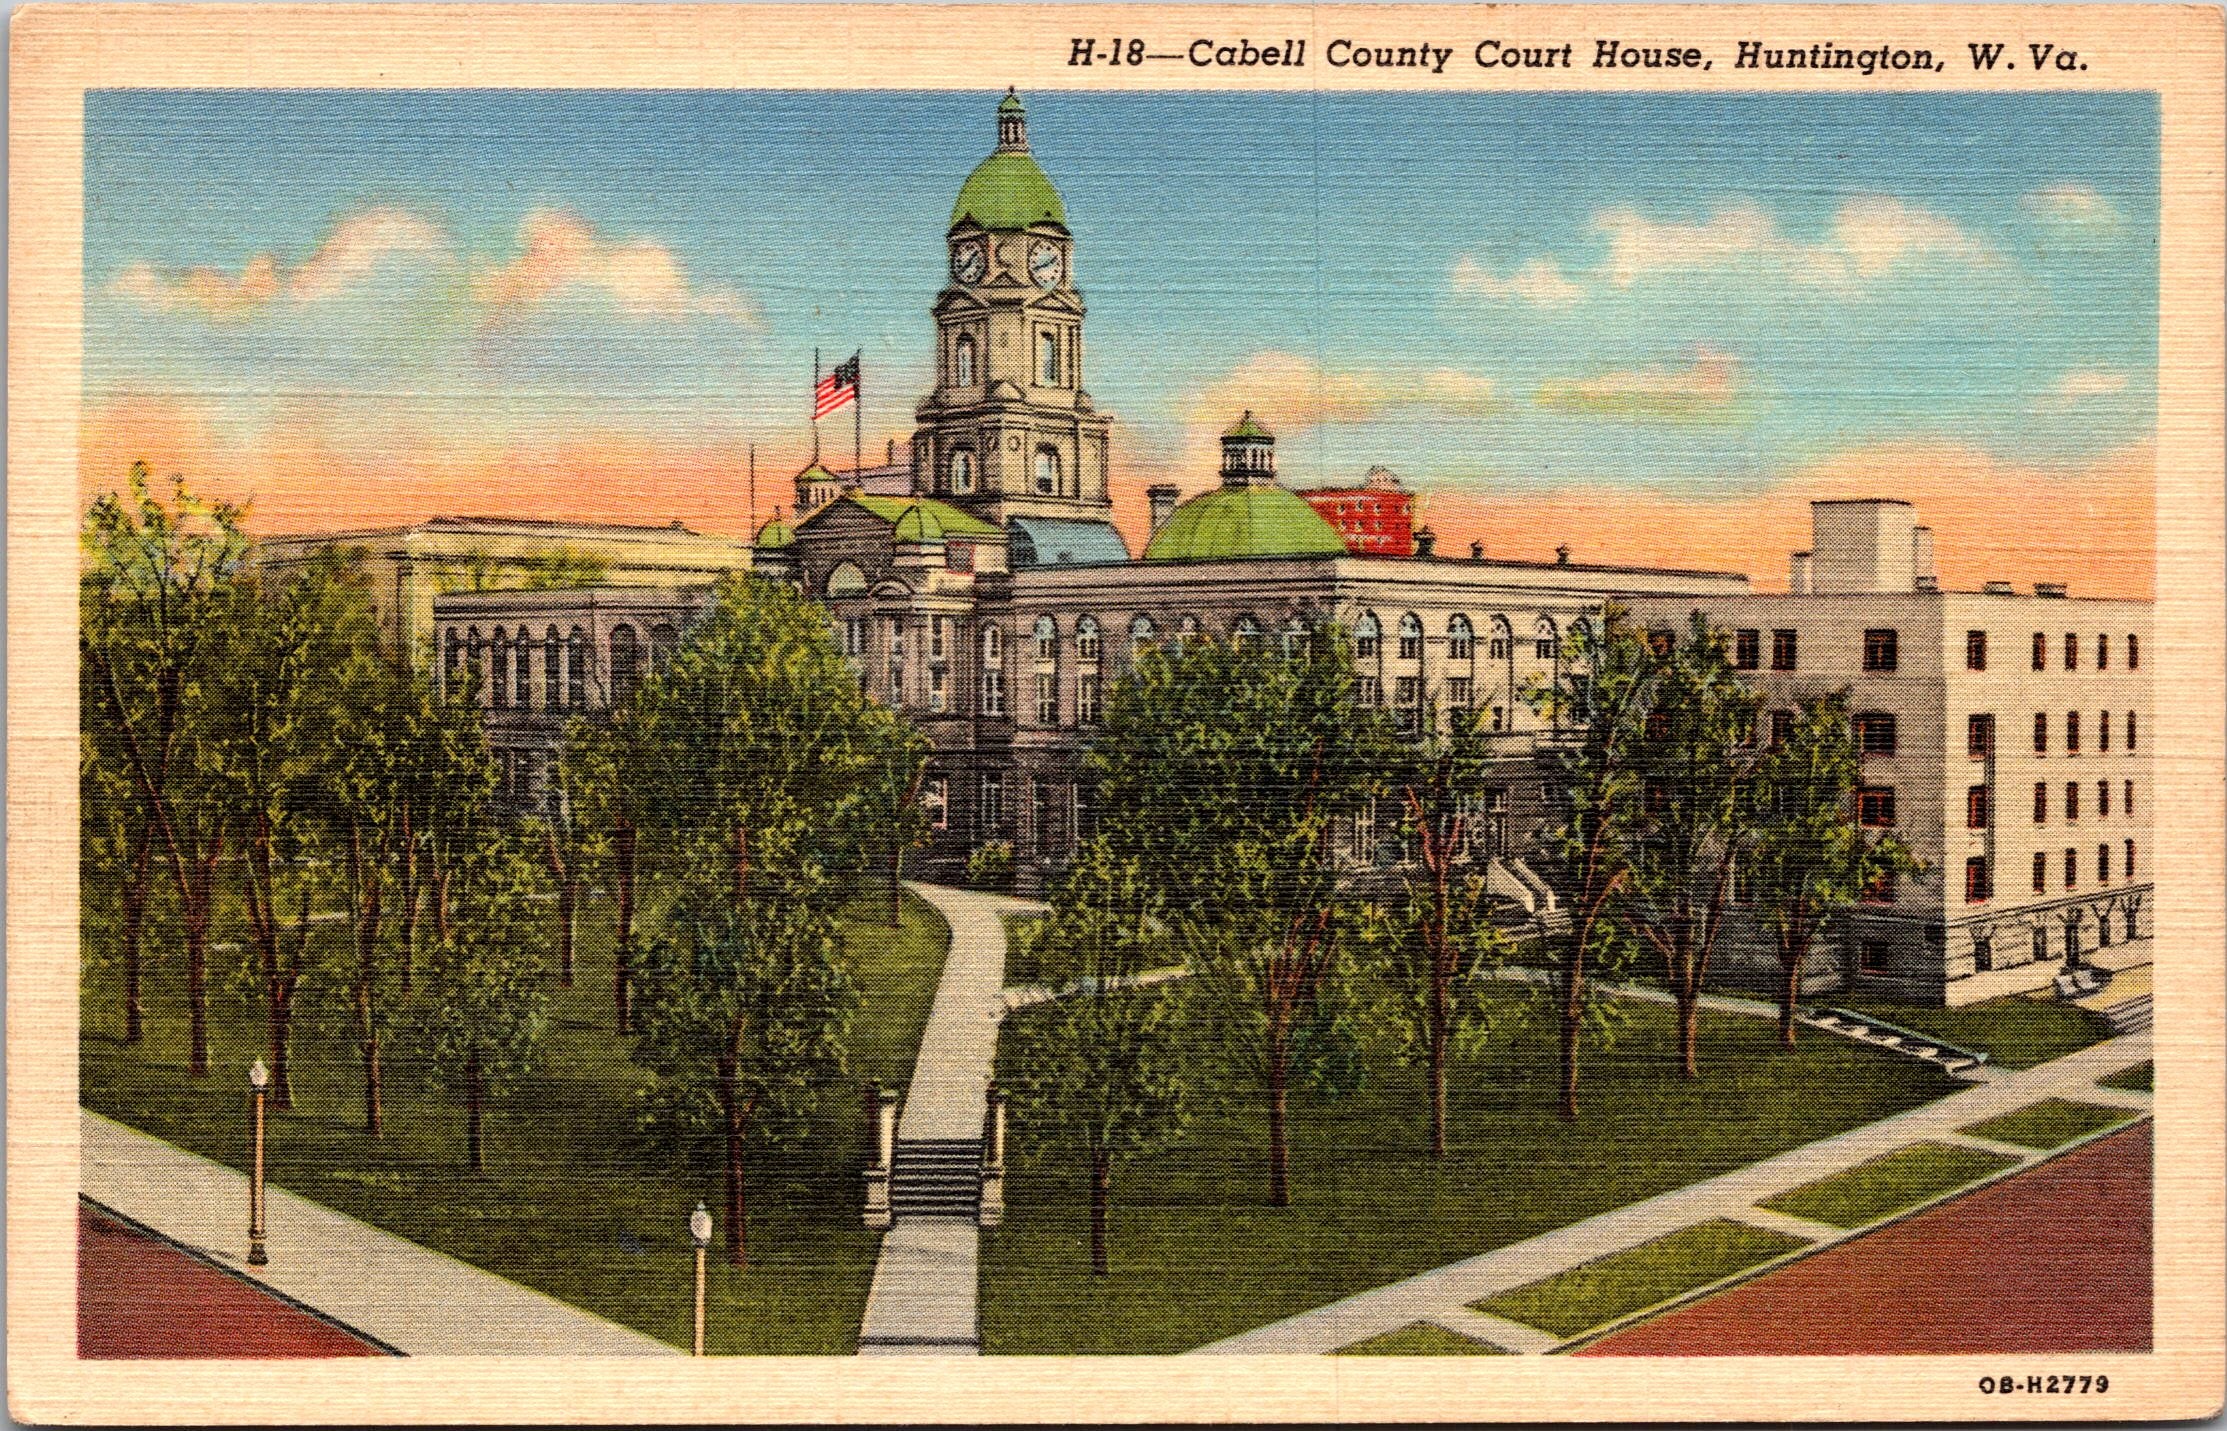 Cabell County Court House, Huntington, West Virginia, USA, Vintage Post Card